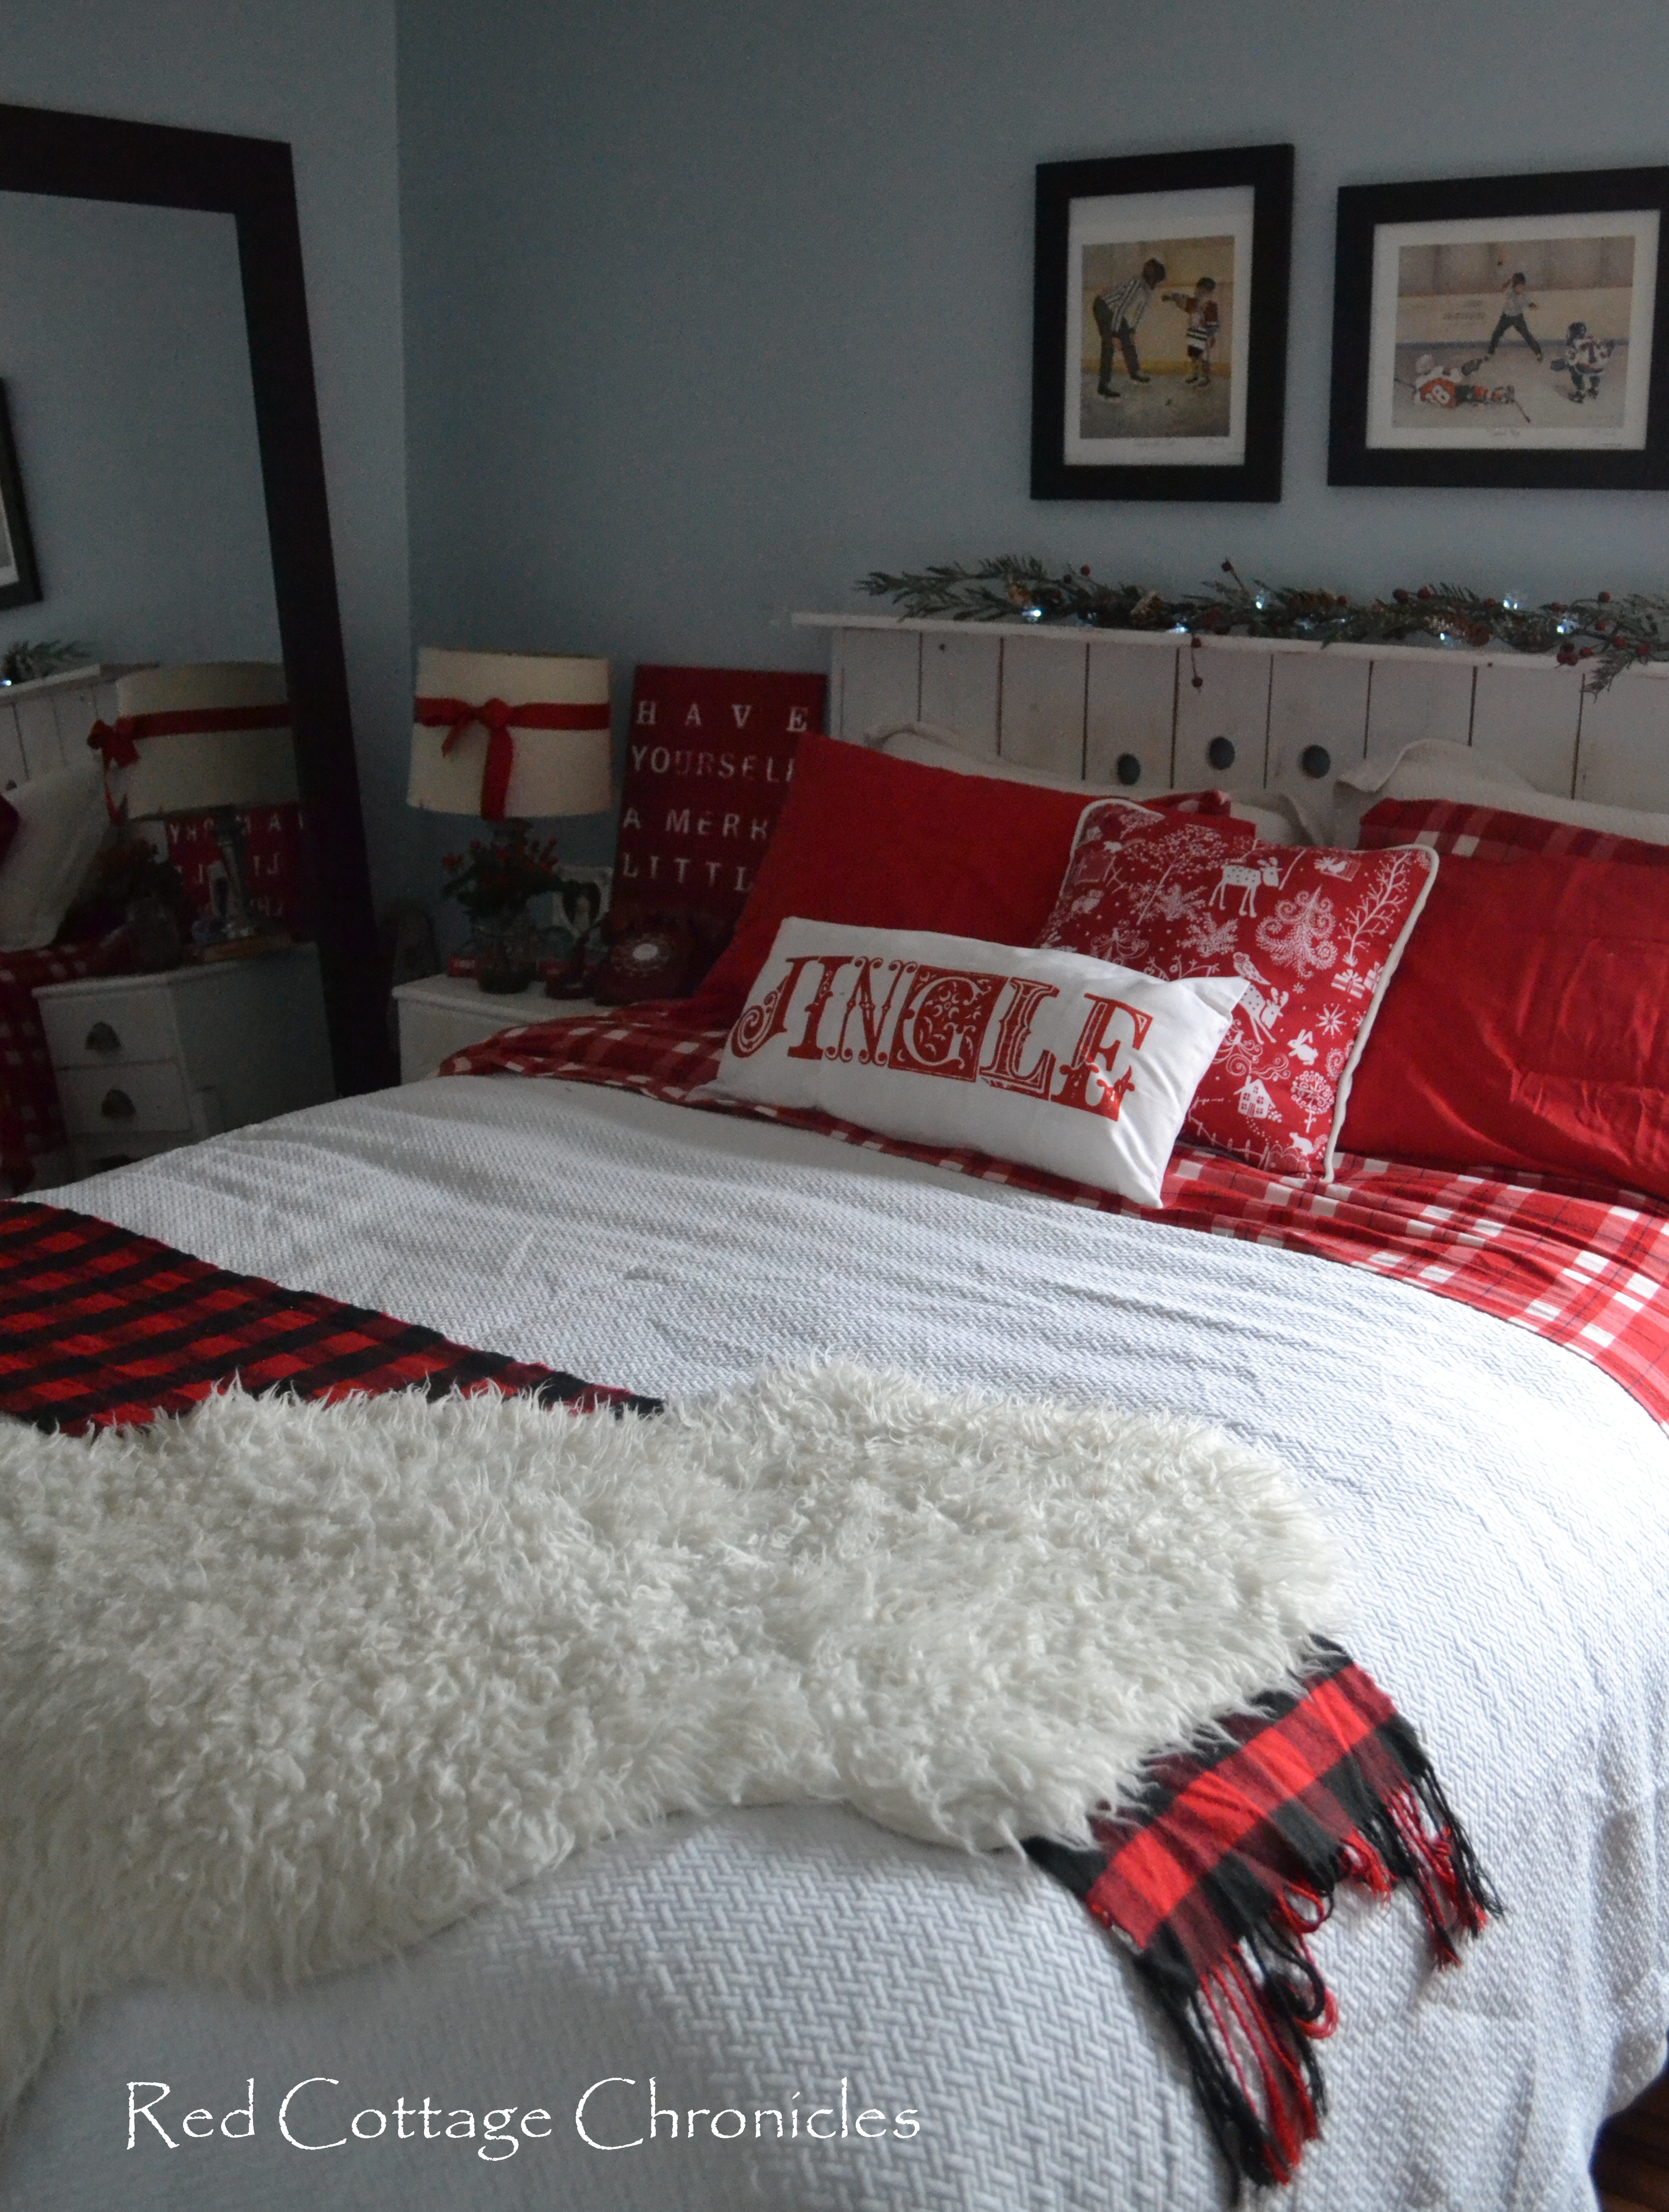 Our Christmas Bedroom - Red Cottage Chronicles